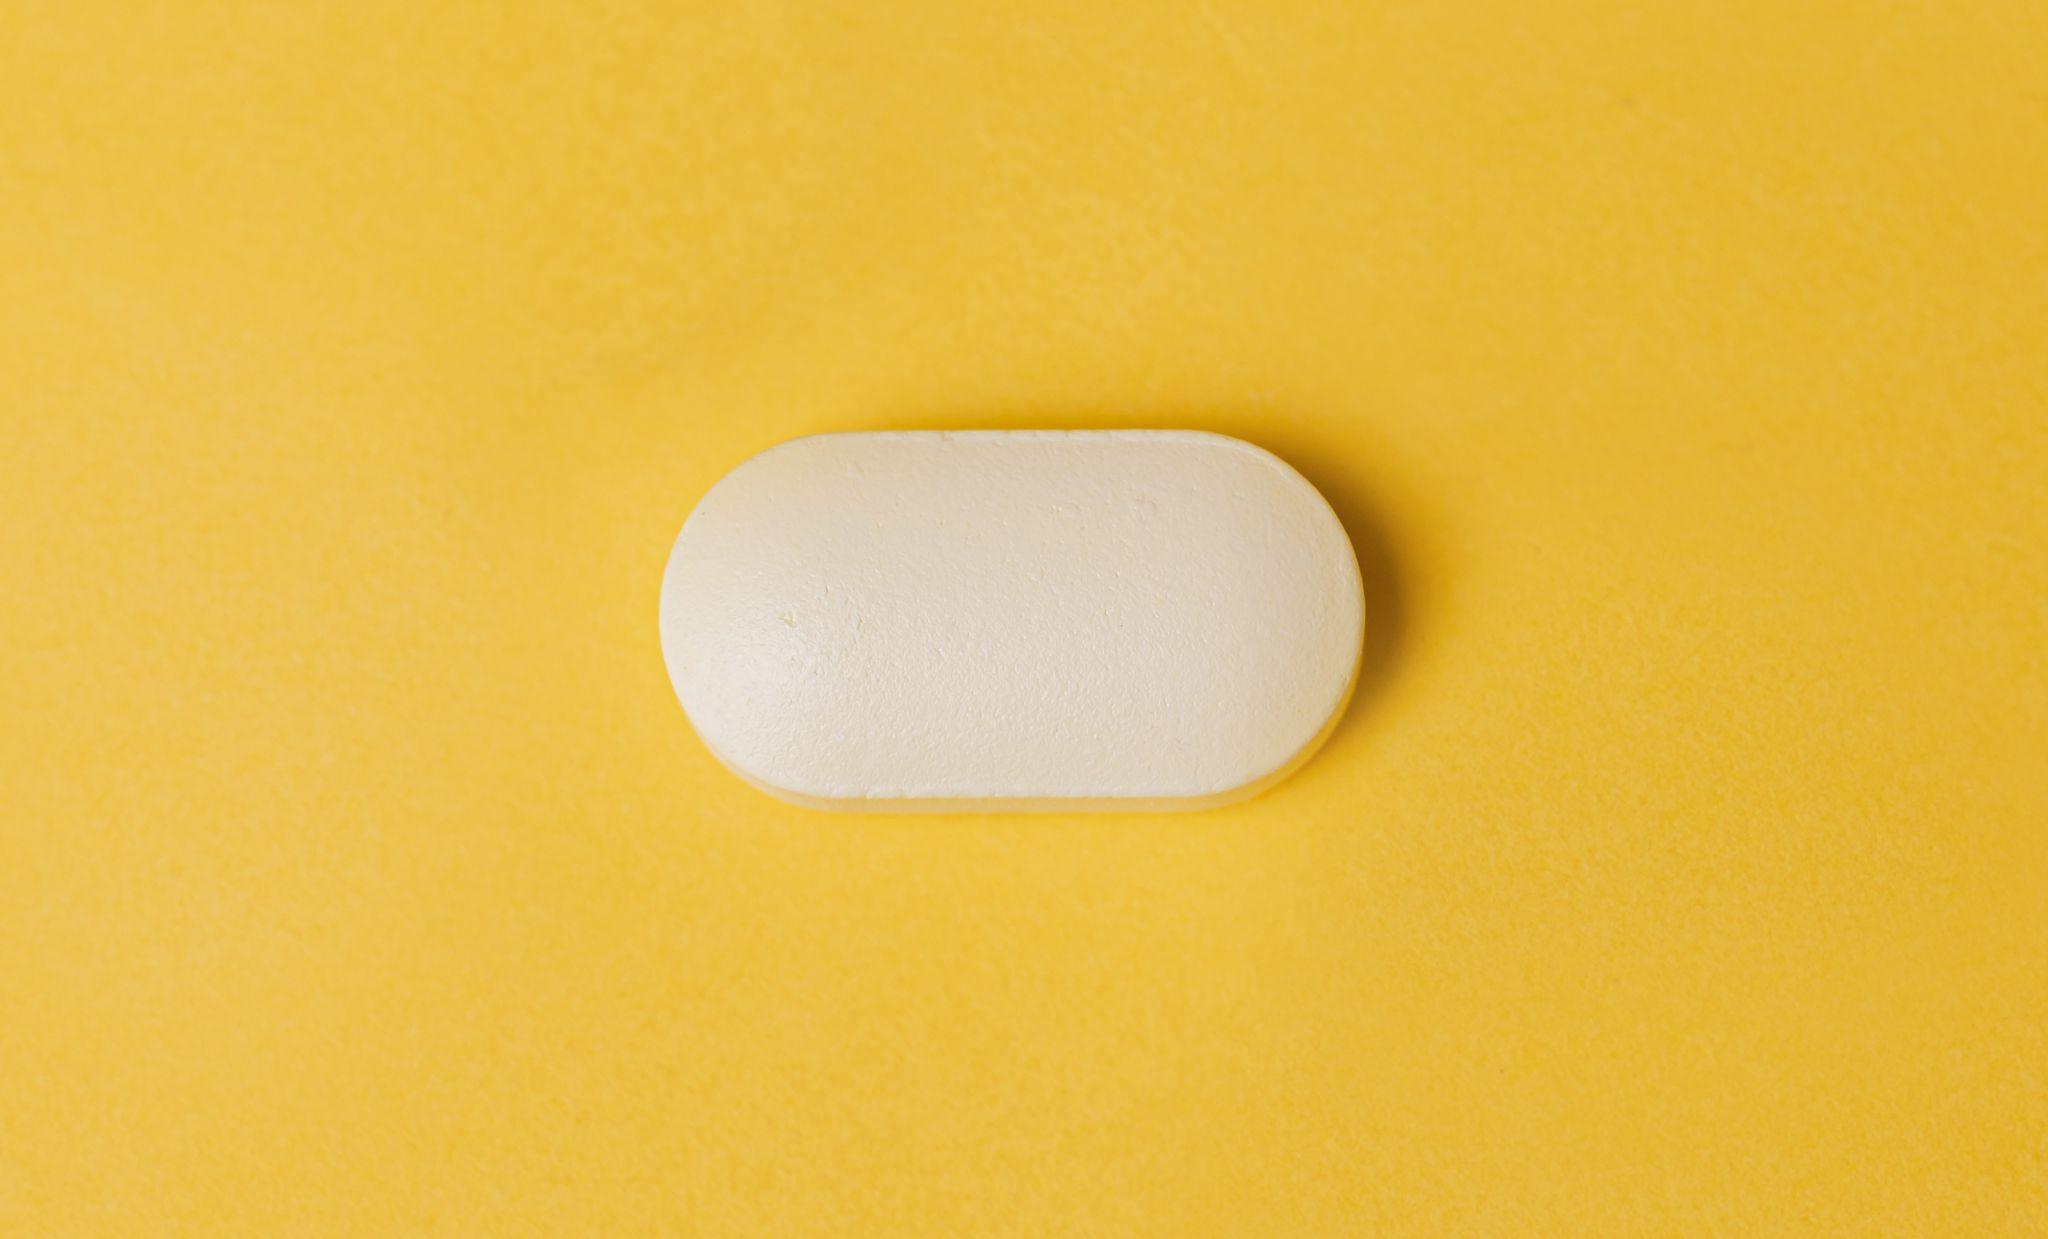 A large off-white pill against an orange background.